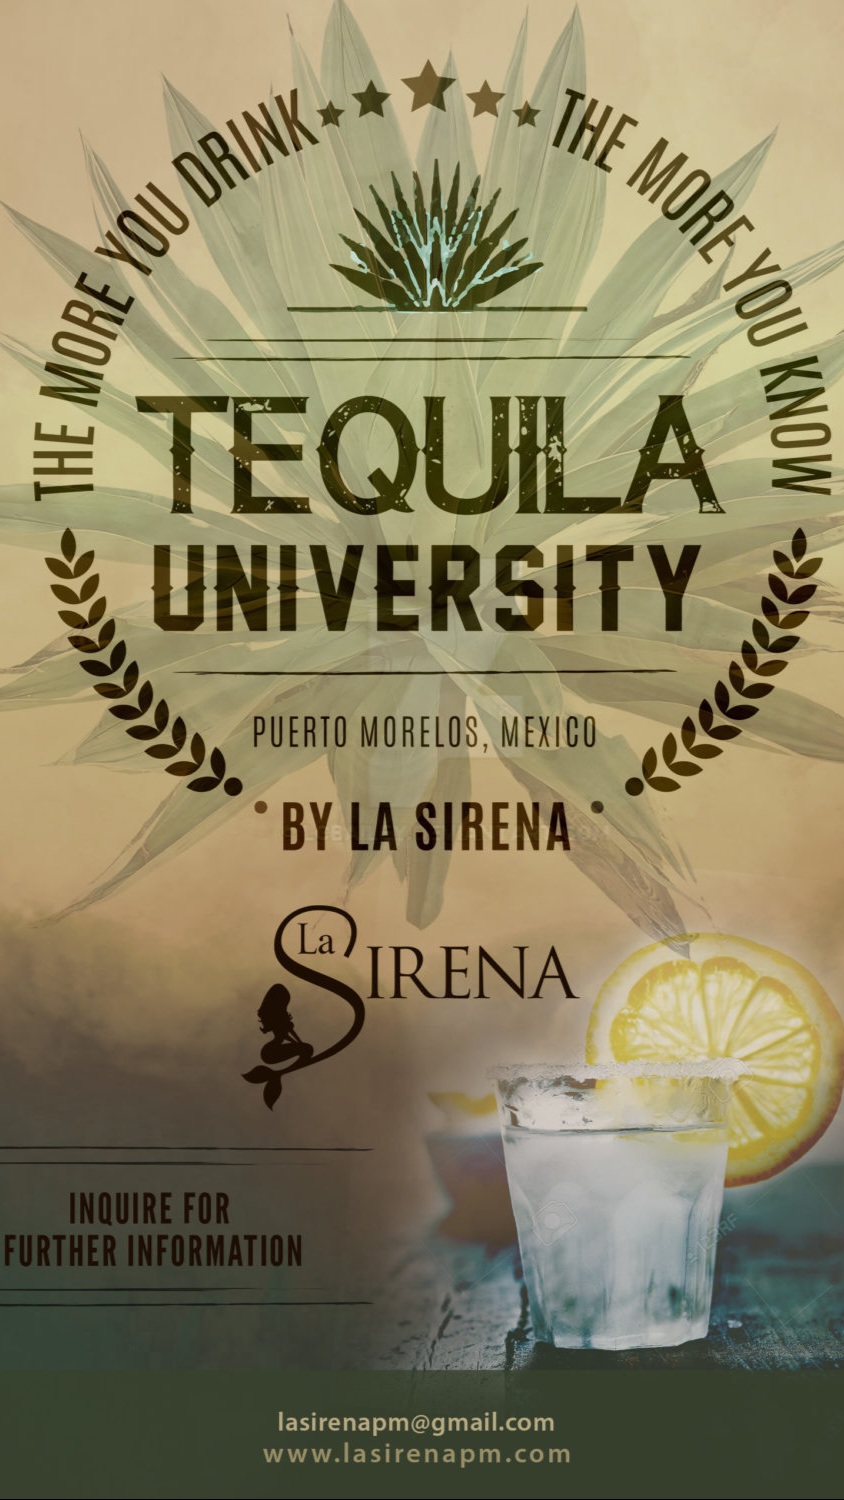 Flyer for Tequila University at La Sirena Puerto Morelos. States "The more you drink, the more you know."